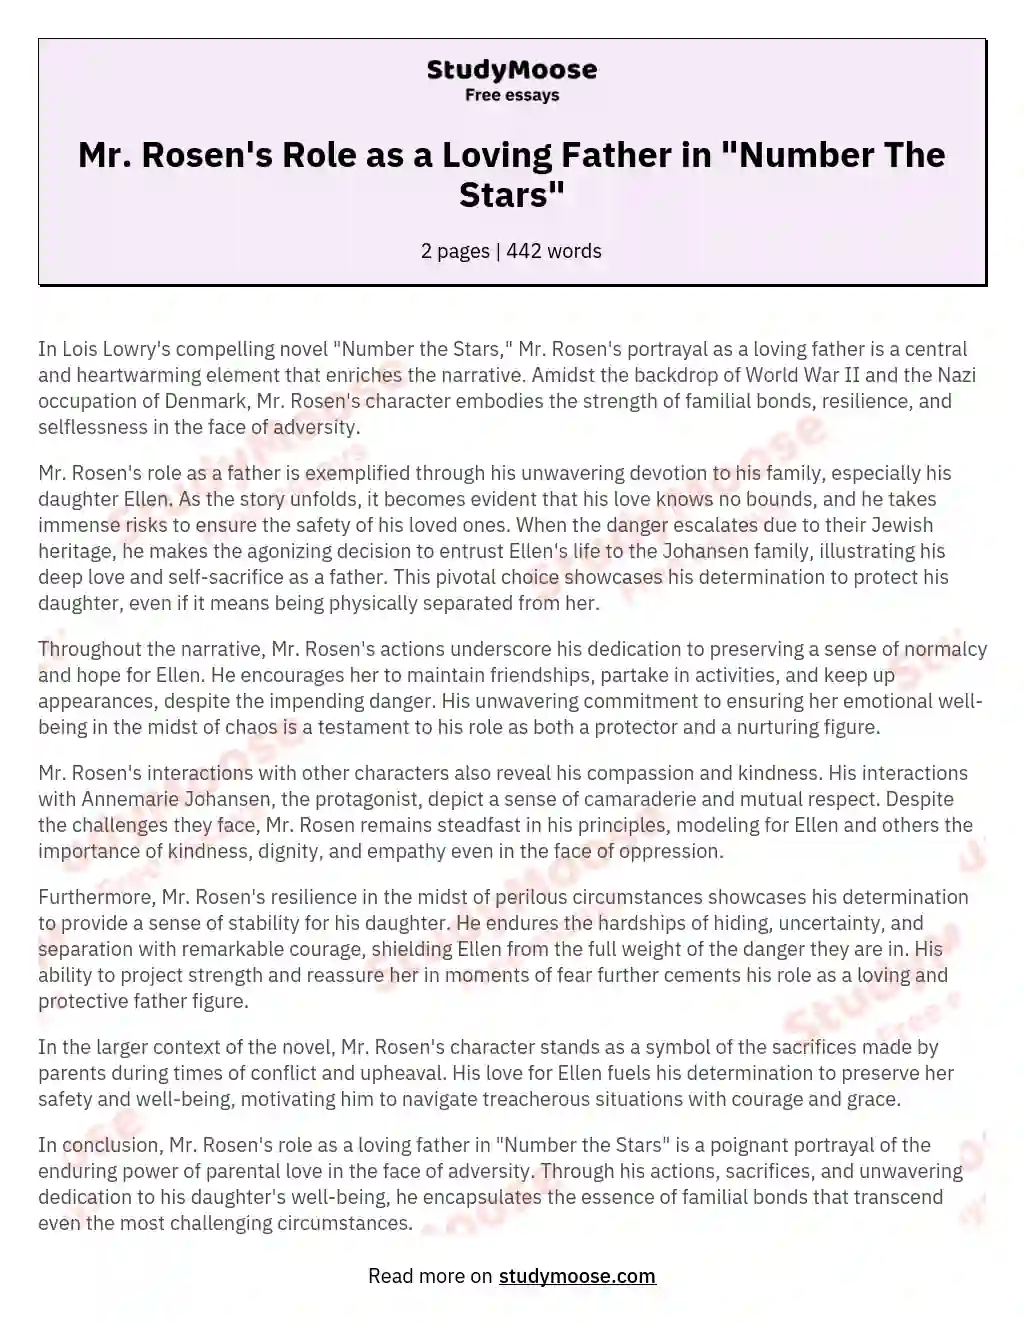 Mr. Rosen's Role as a Loving Father in "Number The Stars" essay